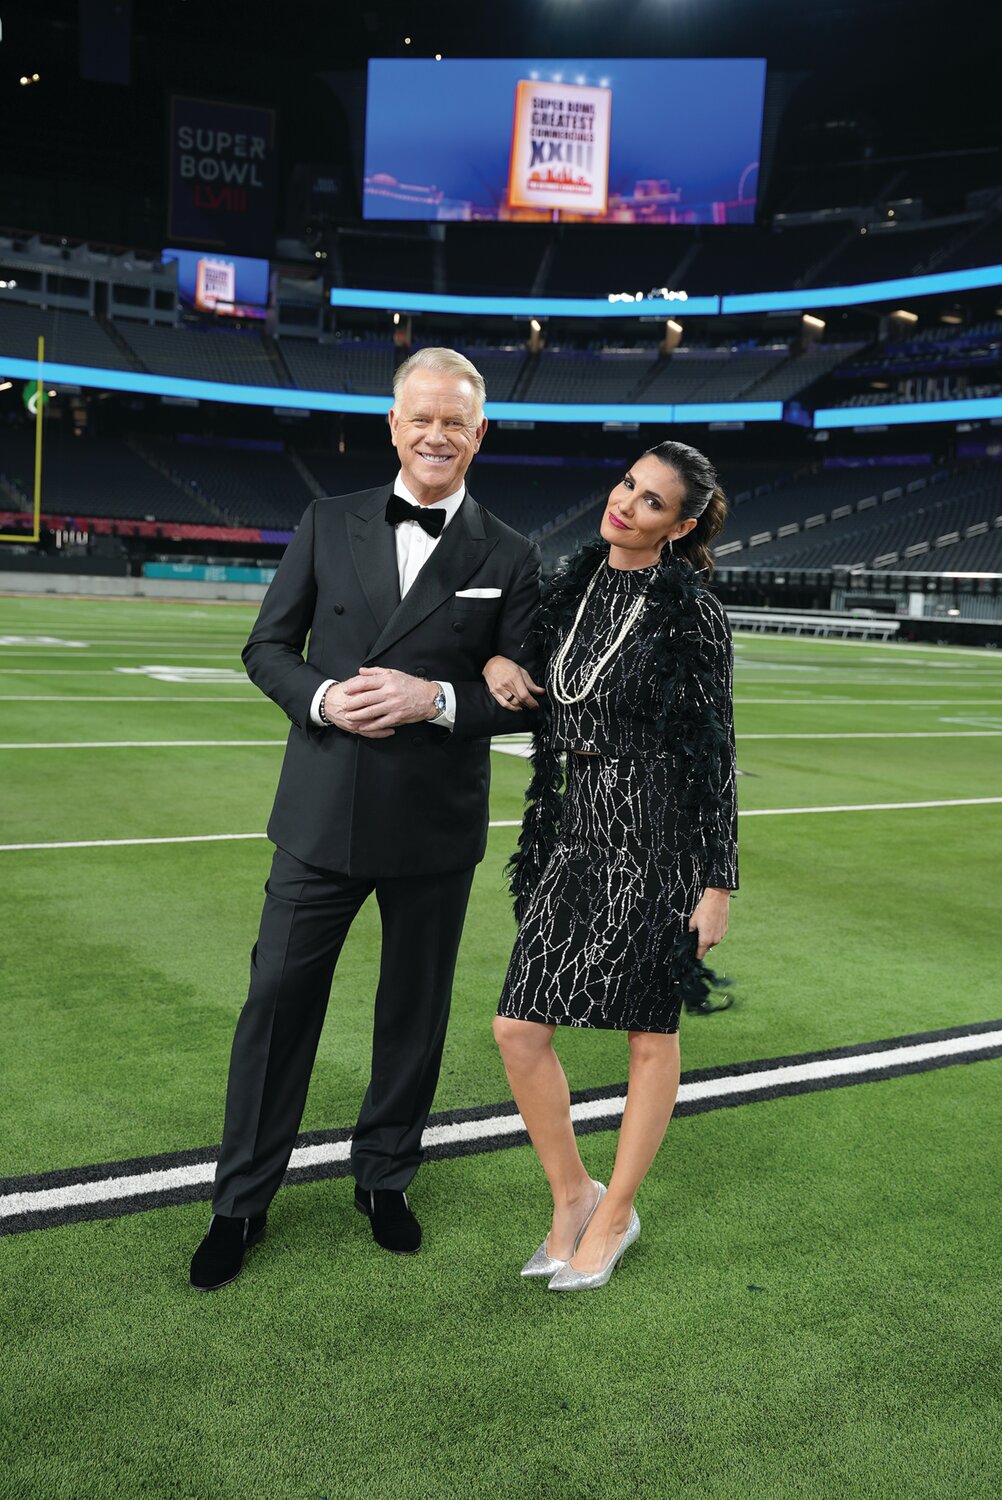 “Super Bowl Greatest Commercials XXIII: The Ultimate Countdown,” hosted by CBS Sports’ Boomer Esiason and actress Daniela Ruah, is set to air 8 p.m. Feb. 9 on the CBS Television Network and stream on Paramount+.